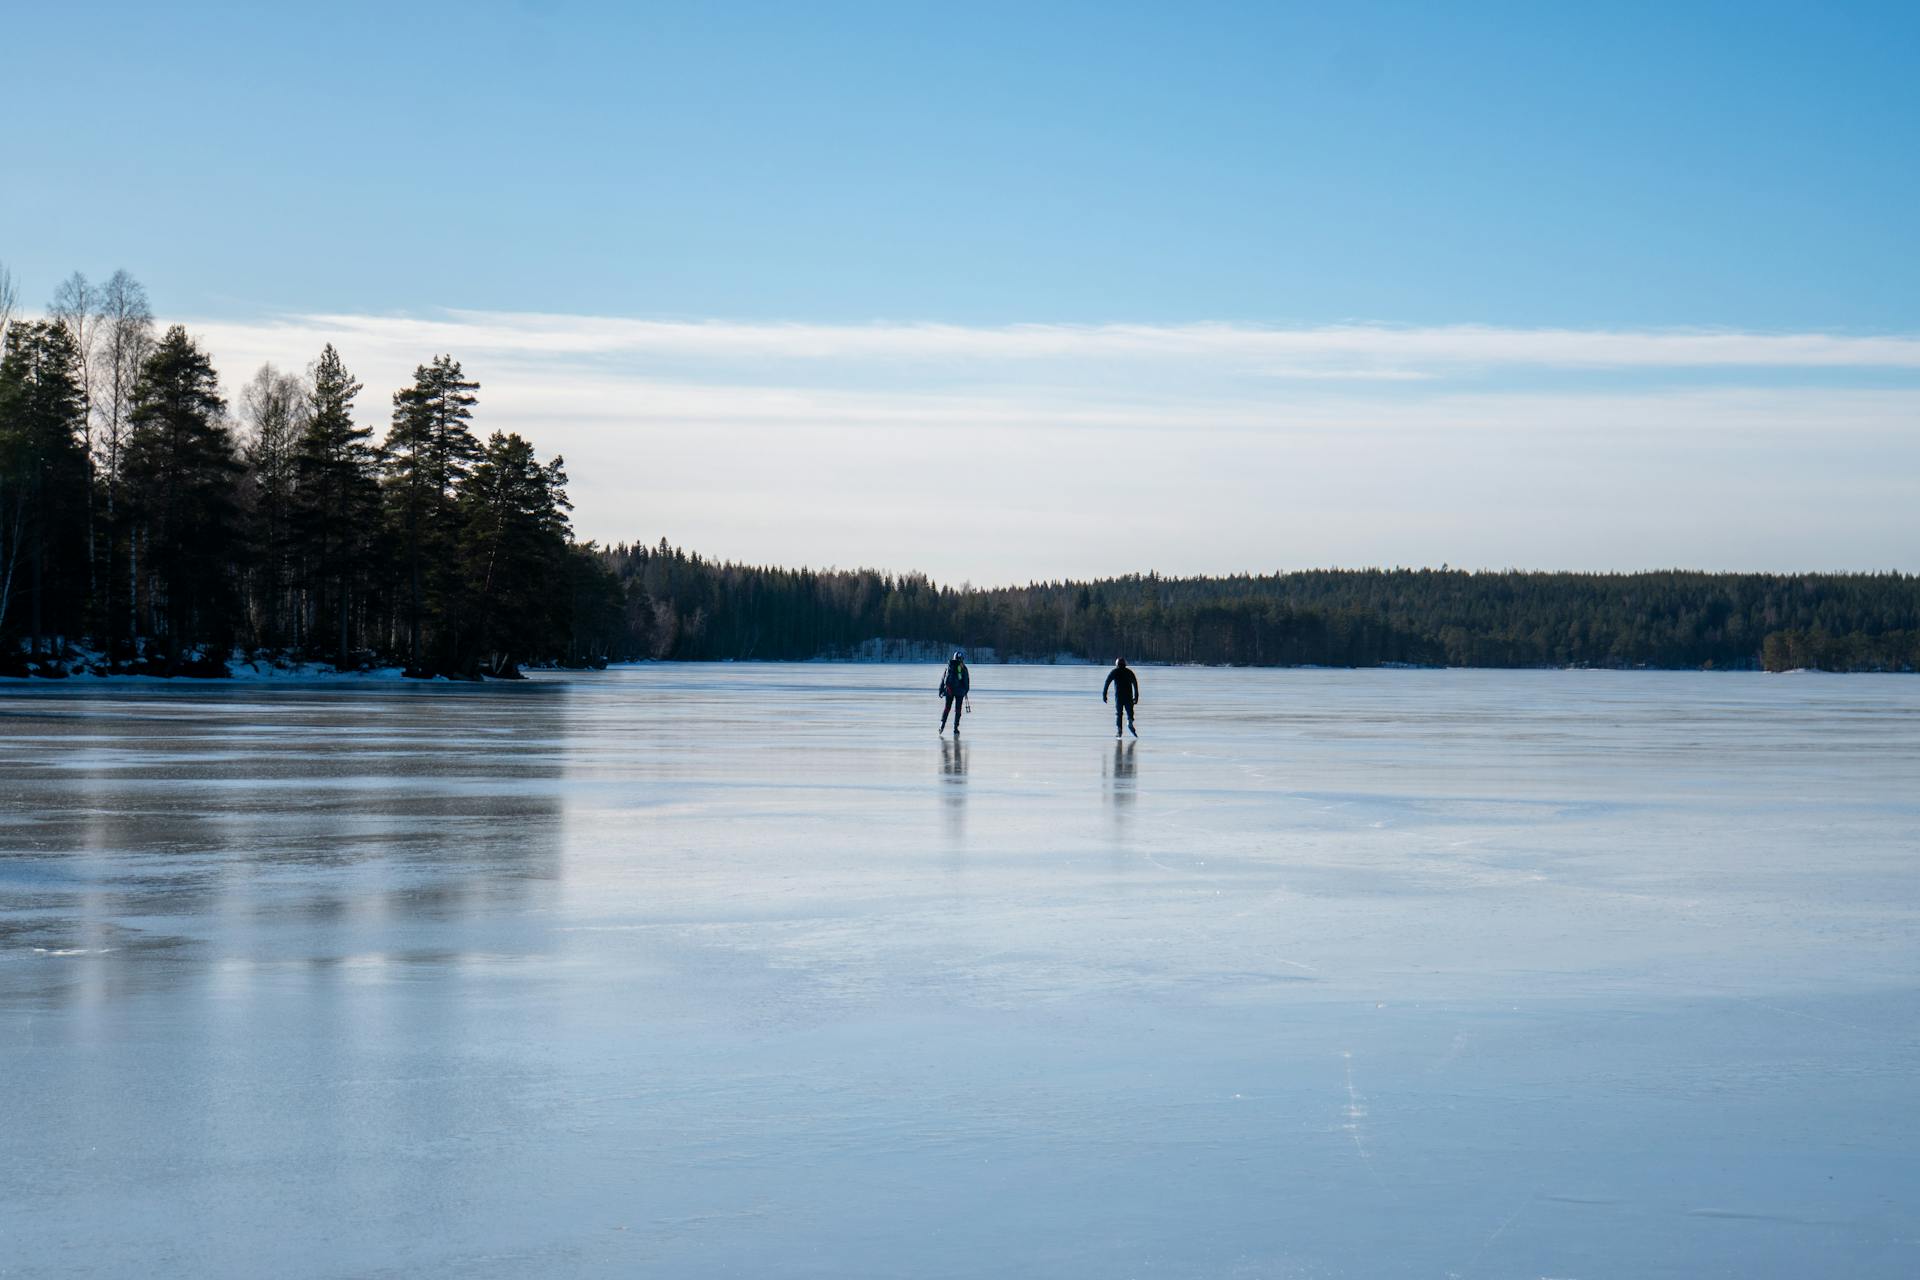 A ice skating duo in the distance enjoying the clar skies and smooth ice during a guided ice skating tour.